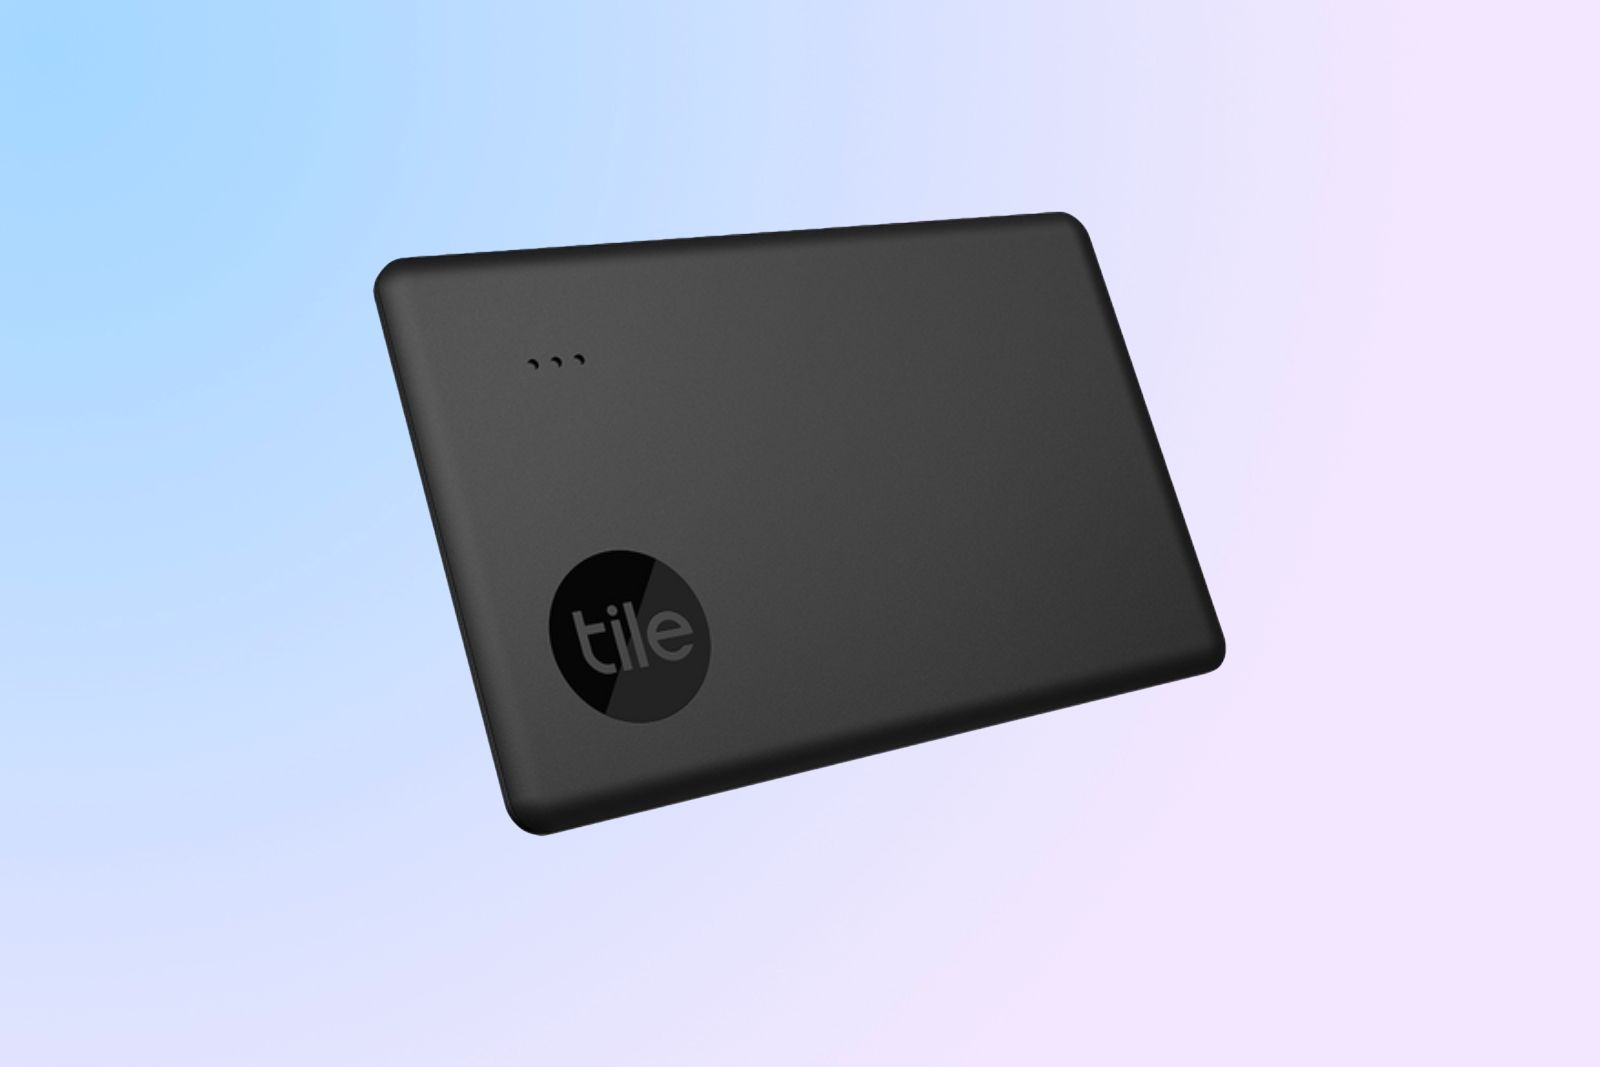 The credit card-shaped Tile Slim Bluetooth tracker with 